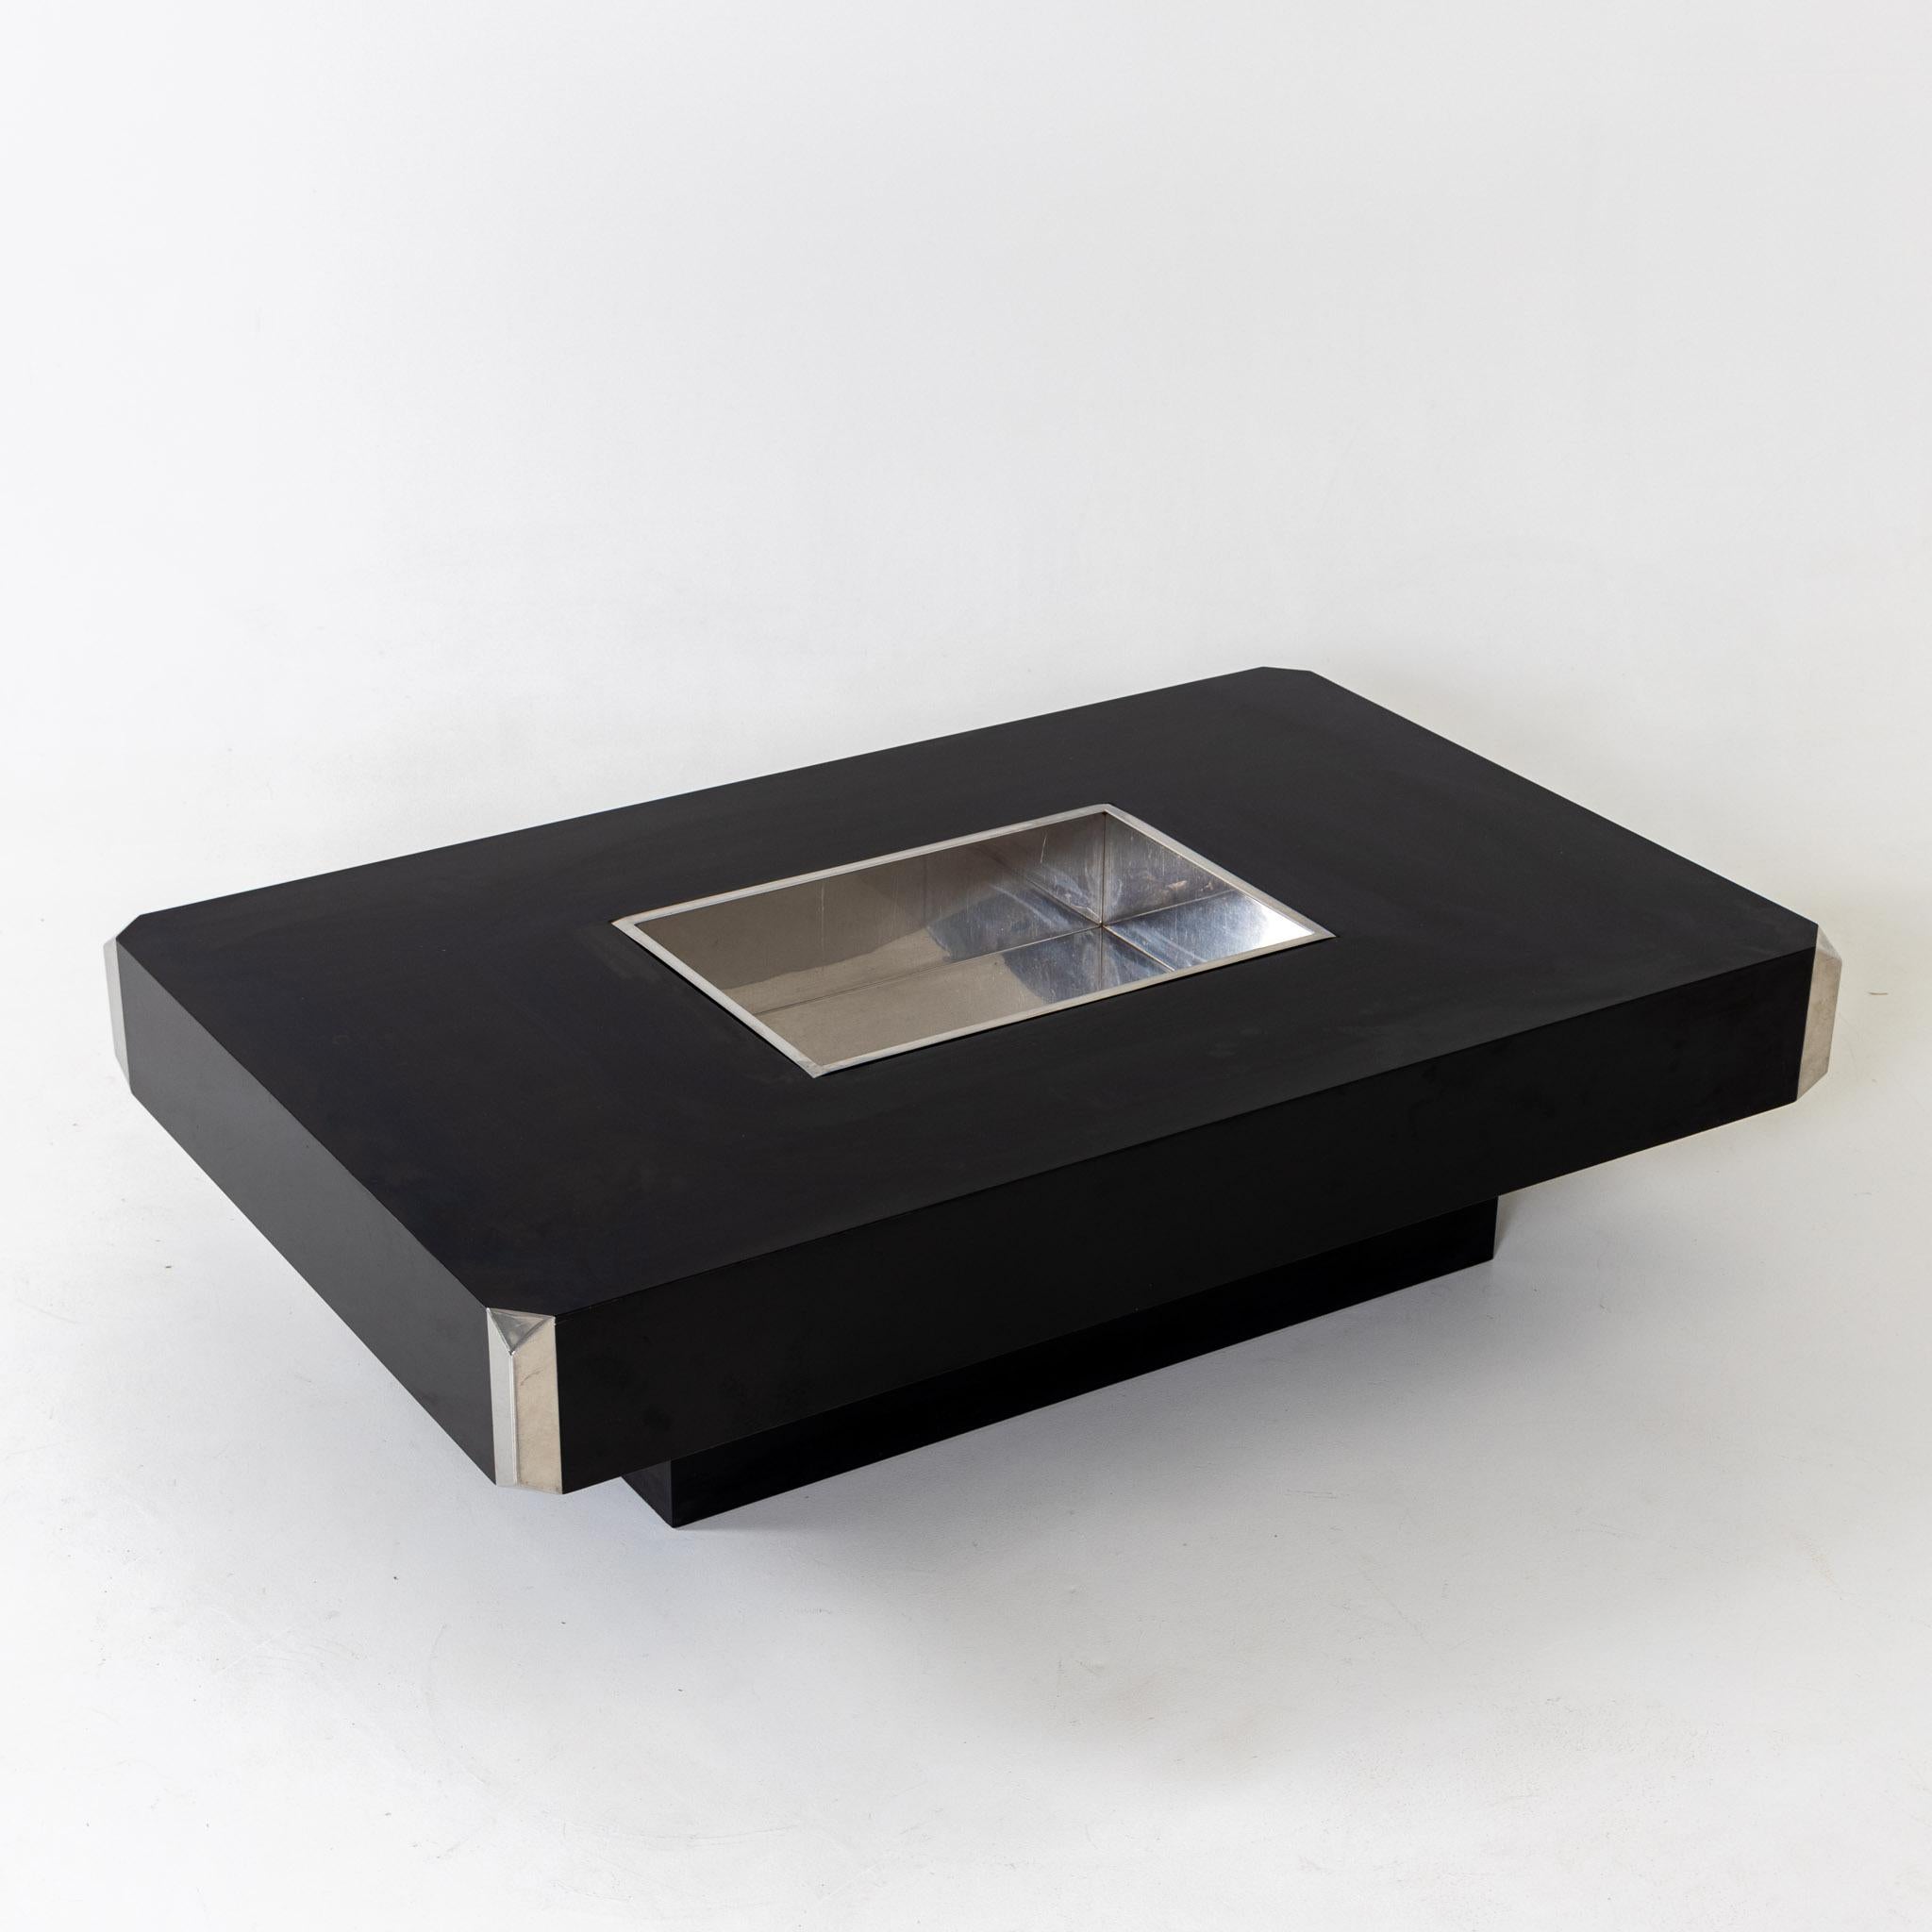 Mid-Century Modern Black Coffee Table Alveo with stainless steel basin by Willy Rizzo, Italy 1970s